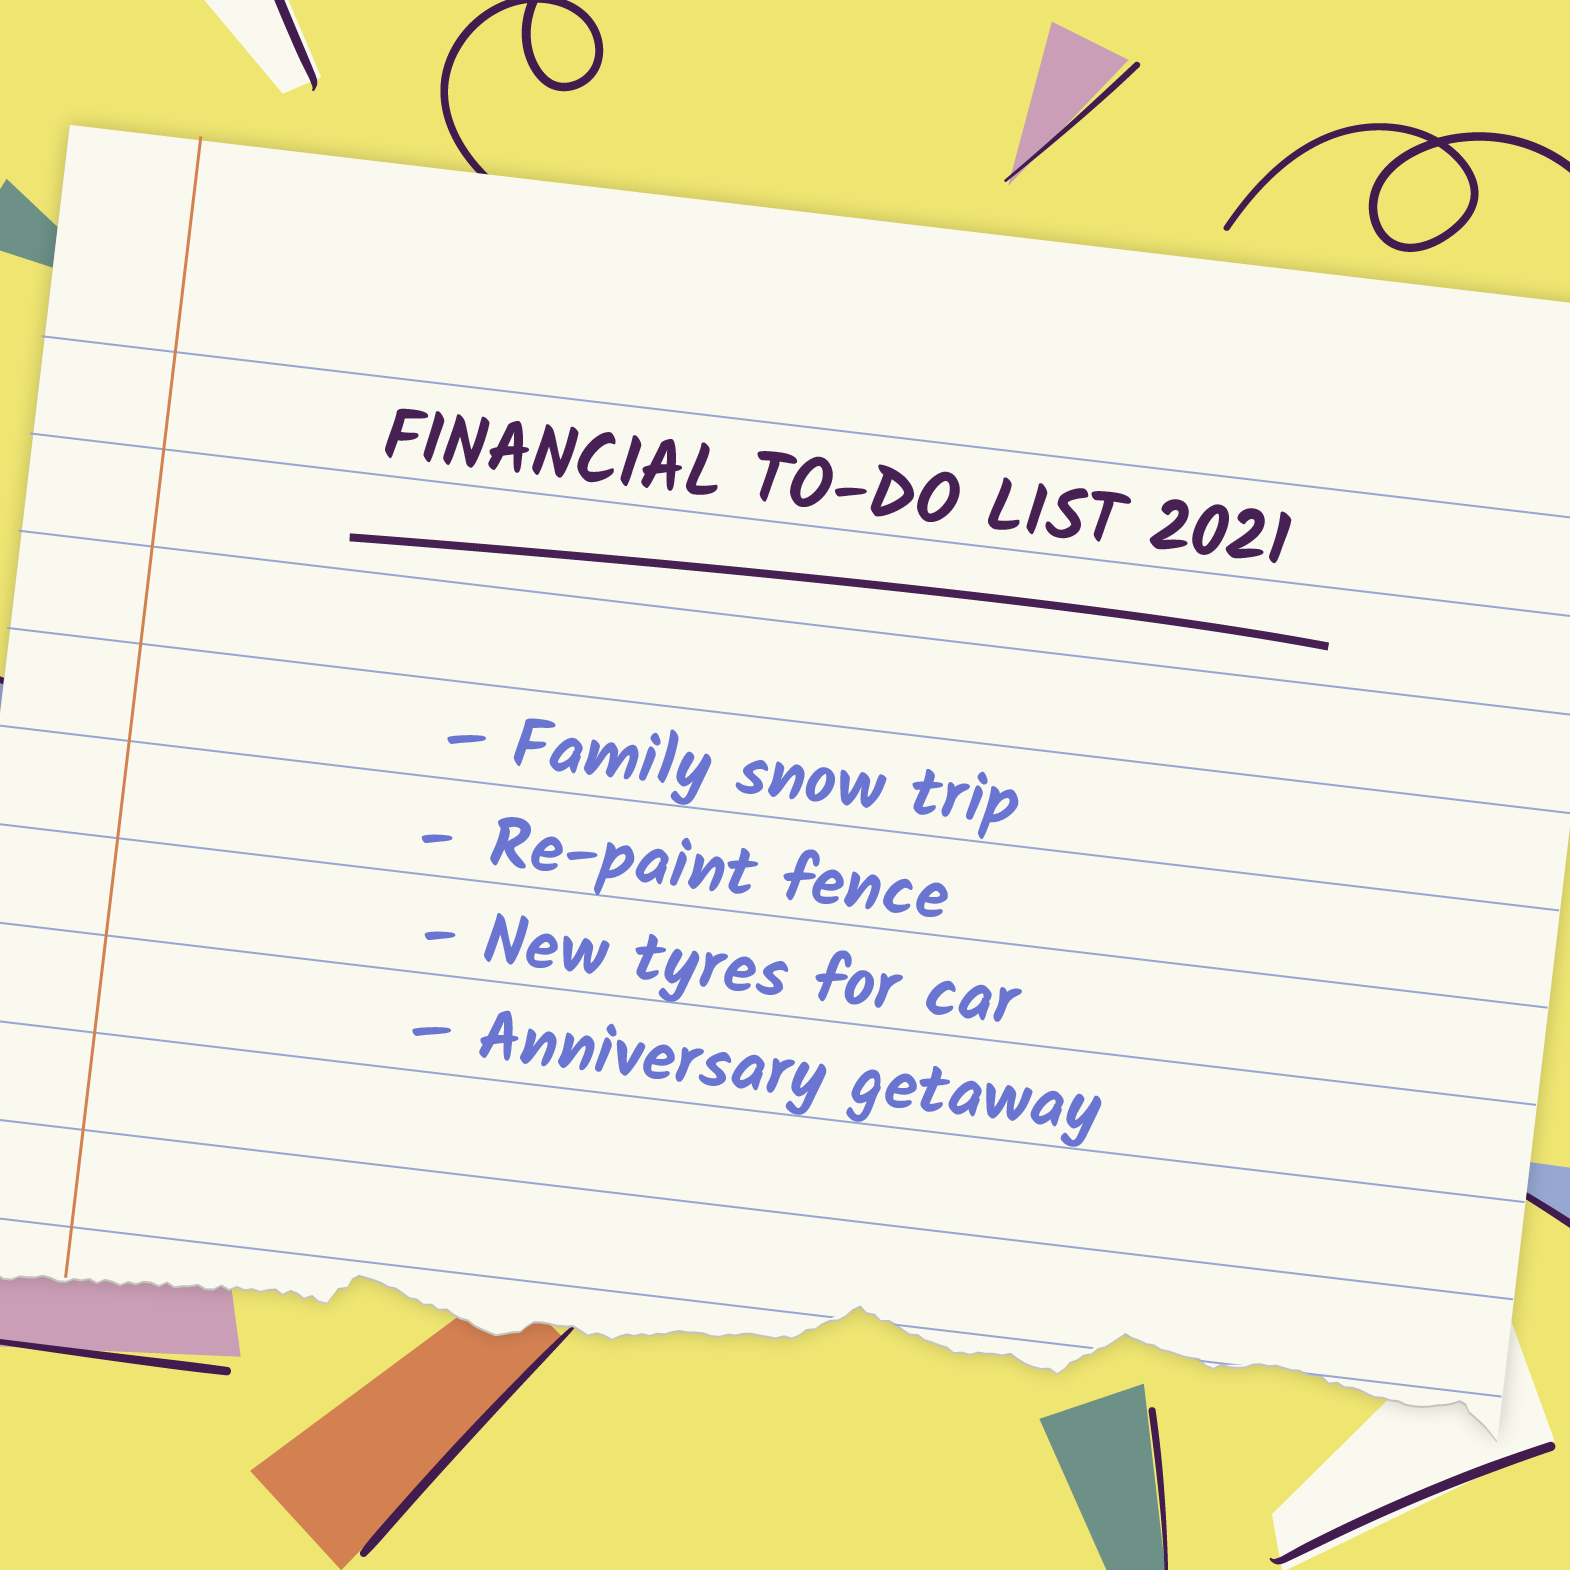 A financial to-do list for the upcoming year